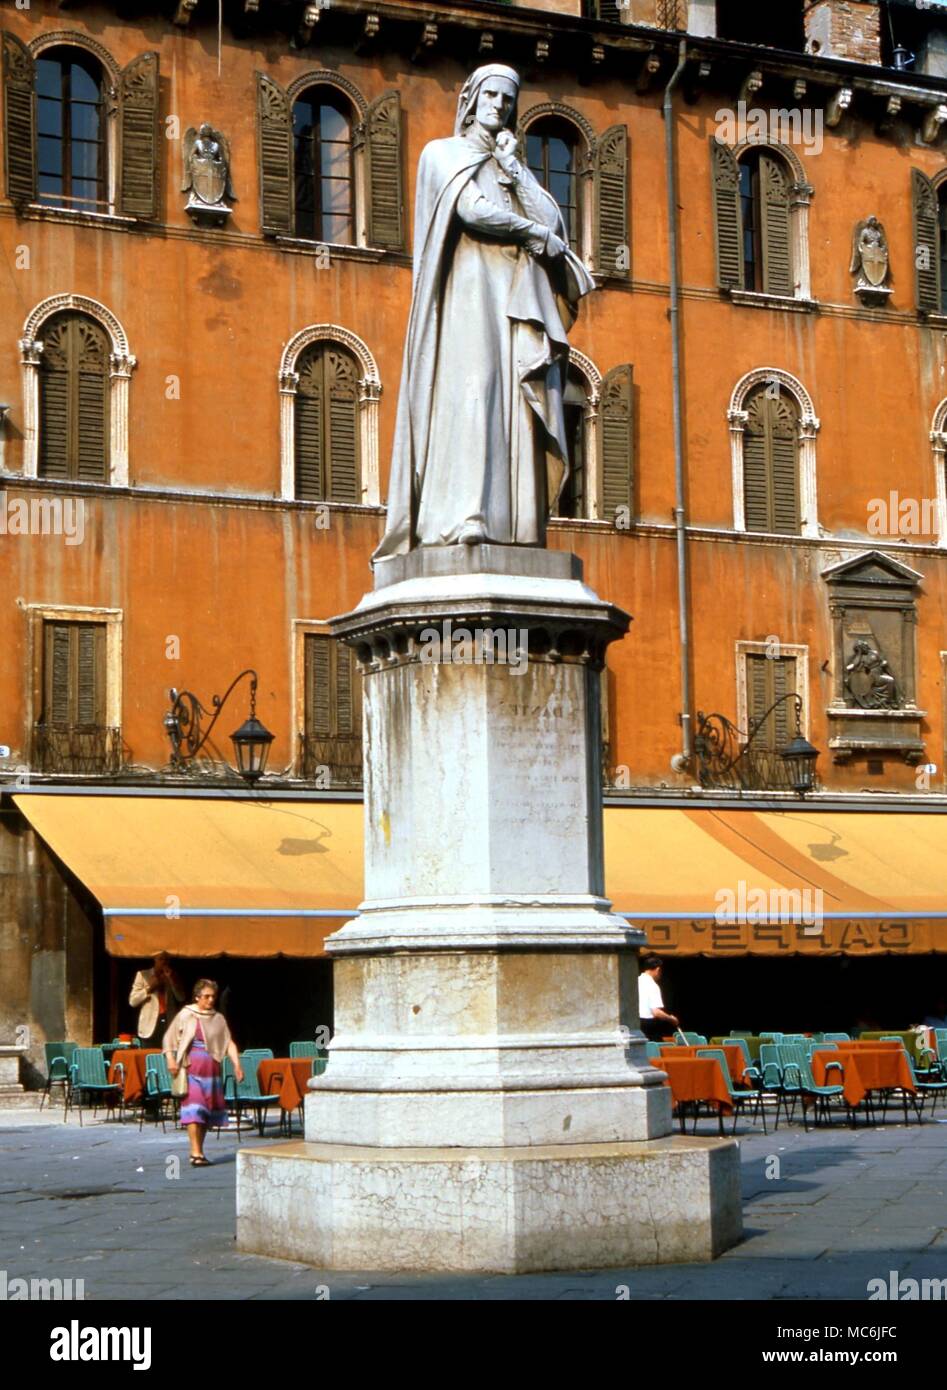 OCCULTISTS - Dante Alighieri (1265-1321), author of the 'Commedia', esotericist, astrologer and initiate poet. Statue in Verona Stock Photo